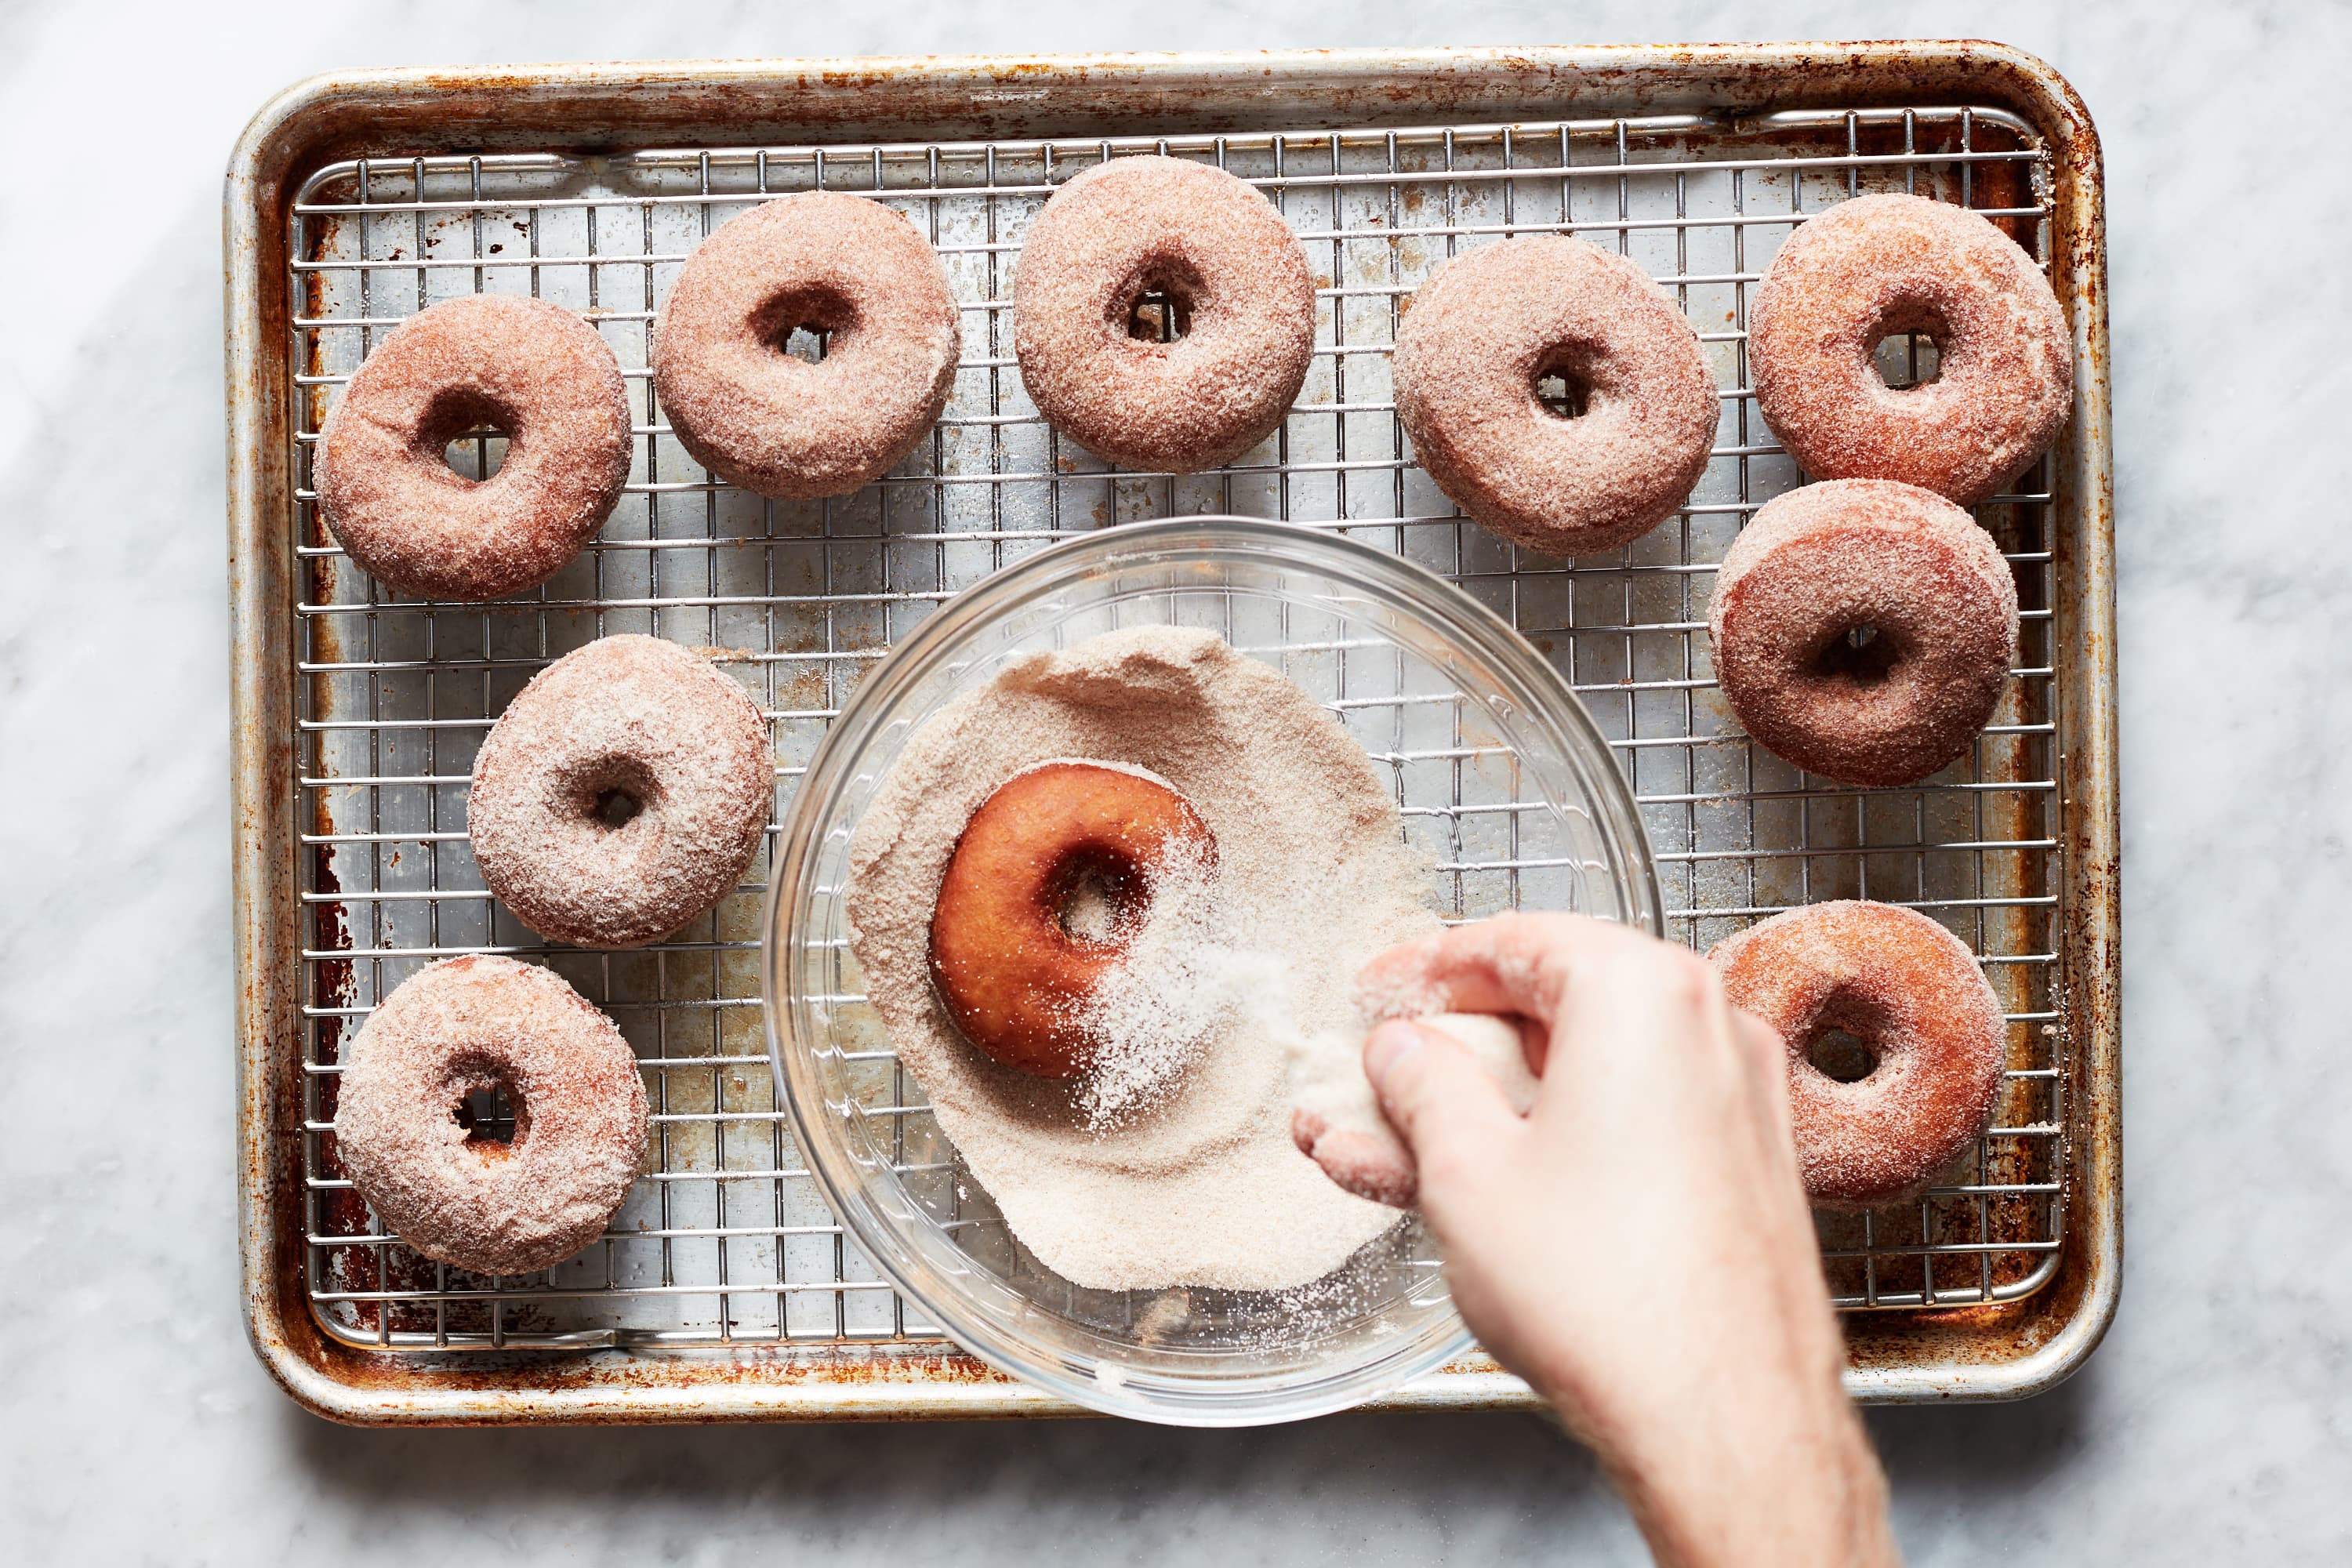 How to Make the Best Apple Cider Doughnuts at Home